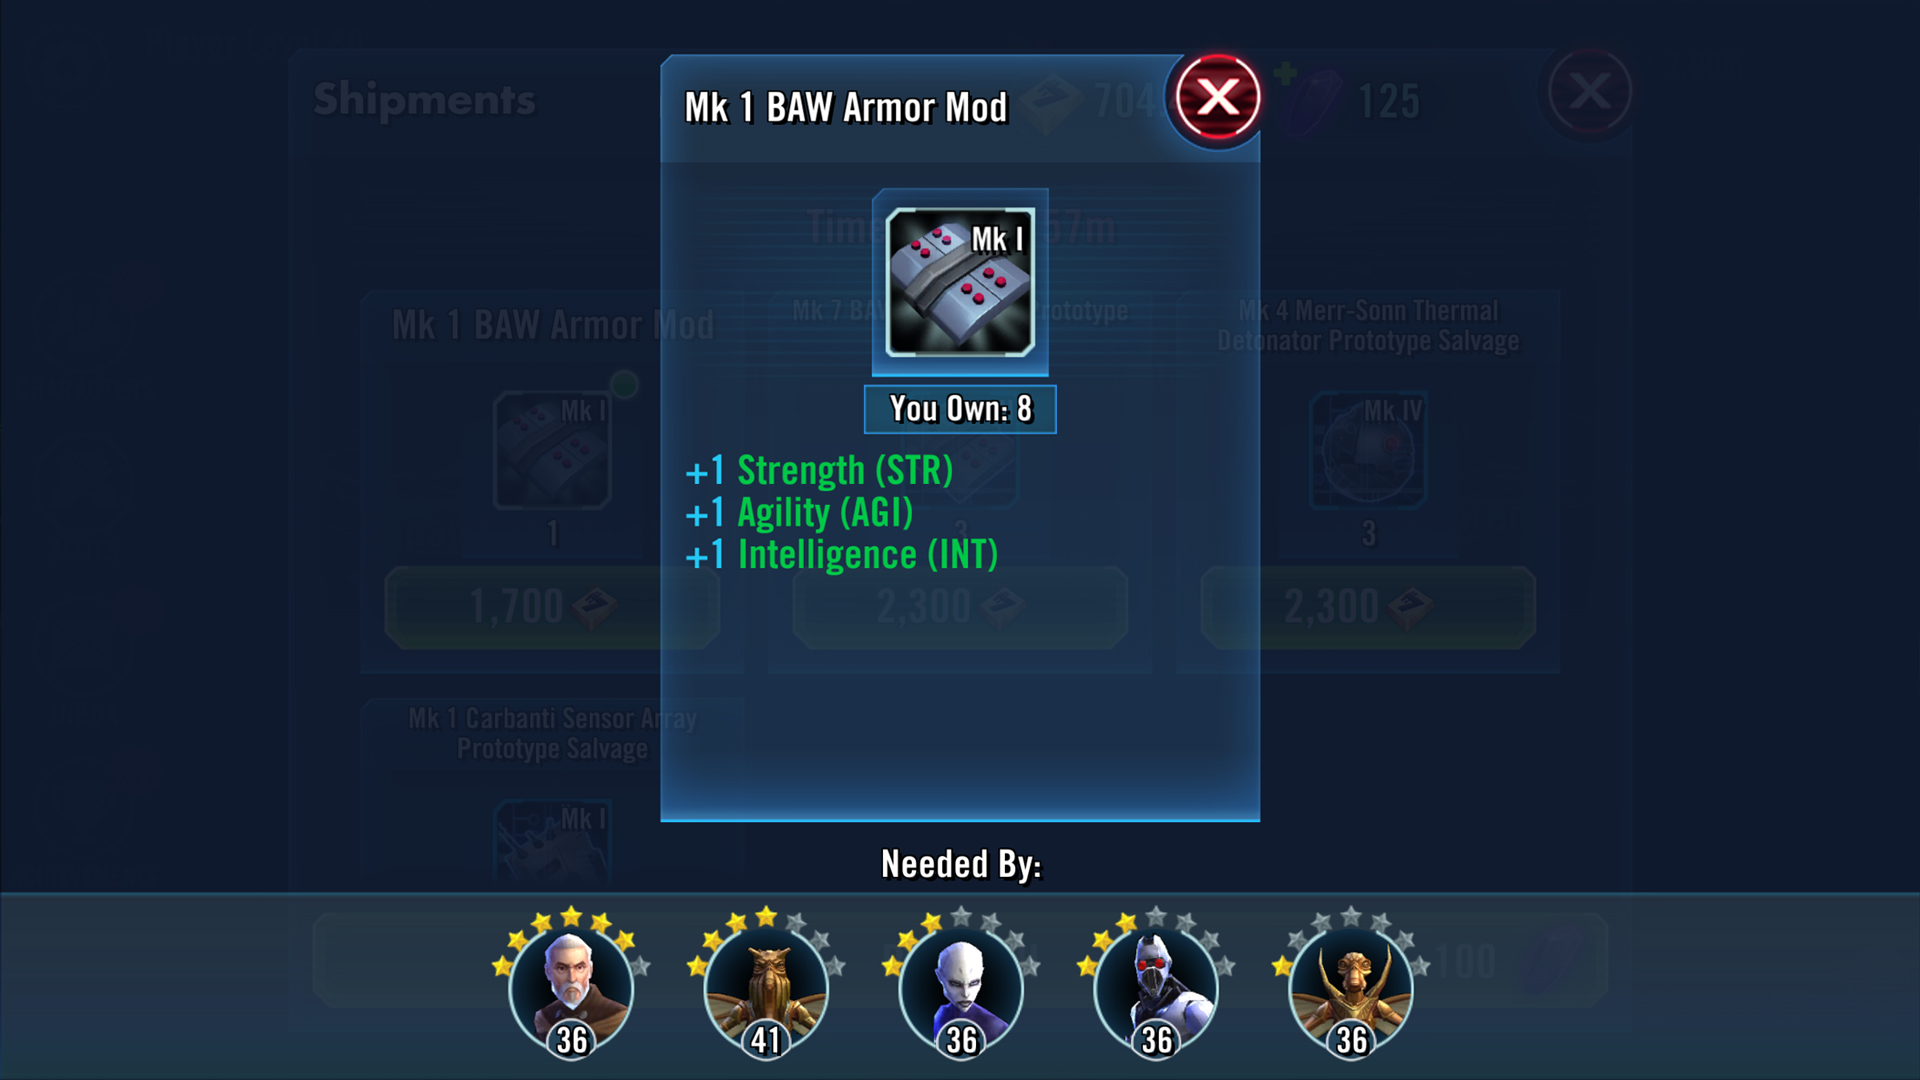 Unlock Grand Master Yoda in an all-new event